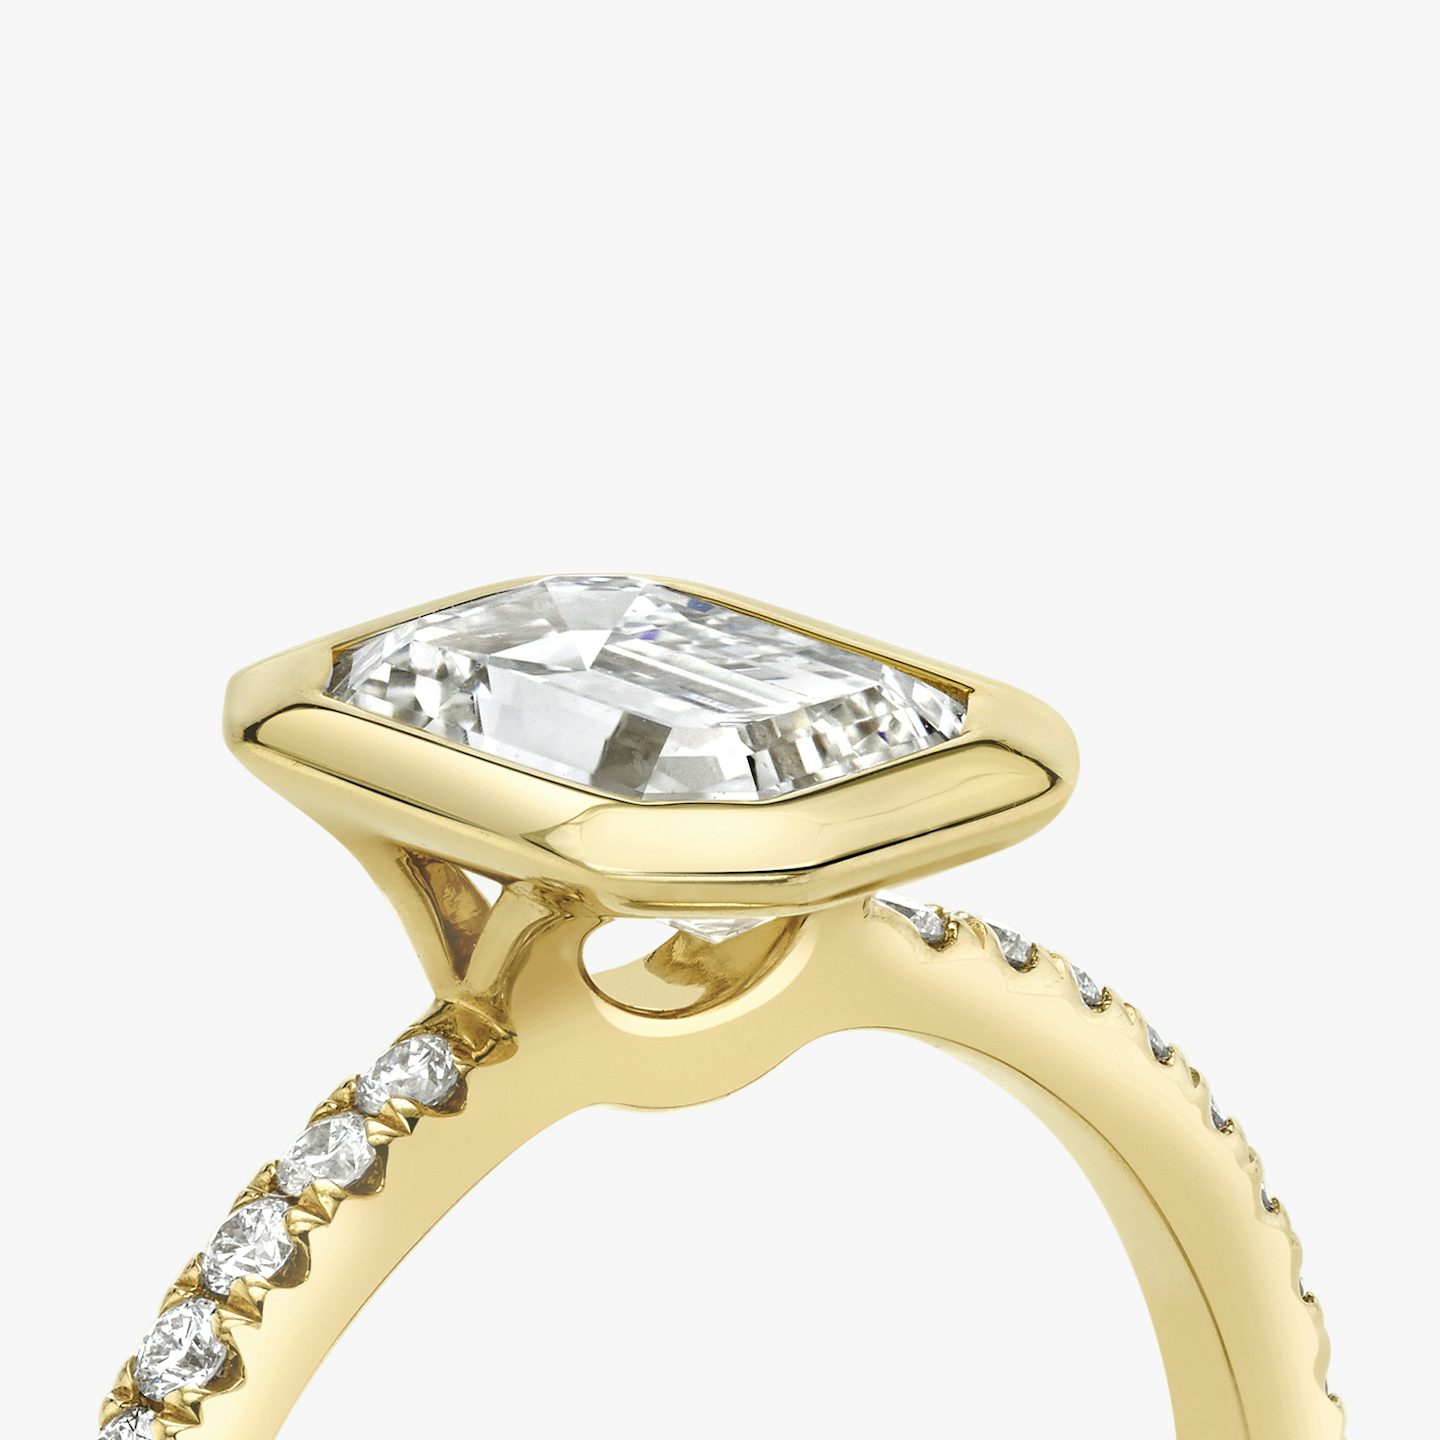 undefined | emerald | 18k | yellow-gold | bandAccent: pave | diamondOrientation: vertical | caratWeight: other